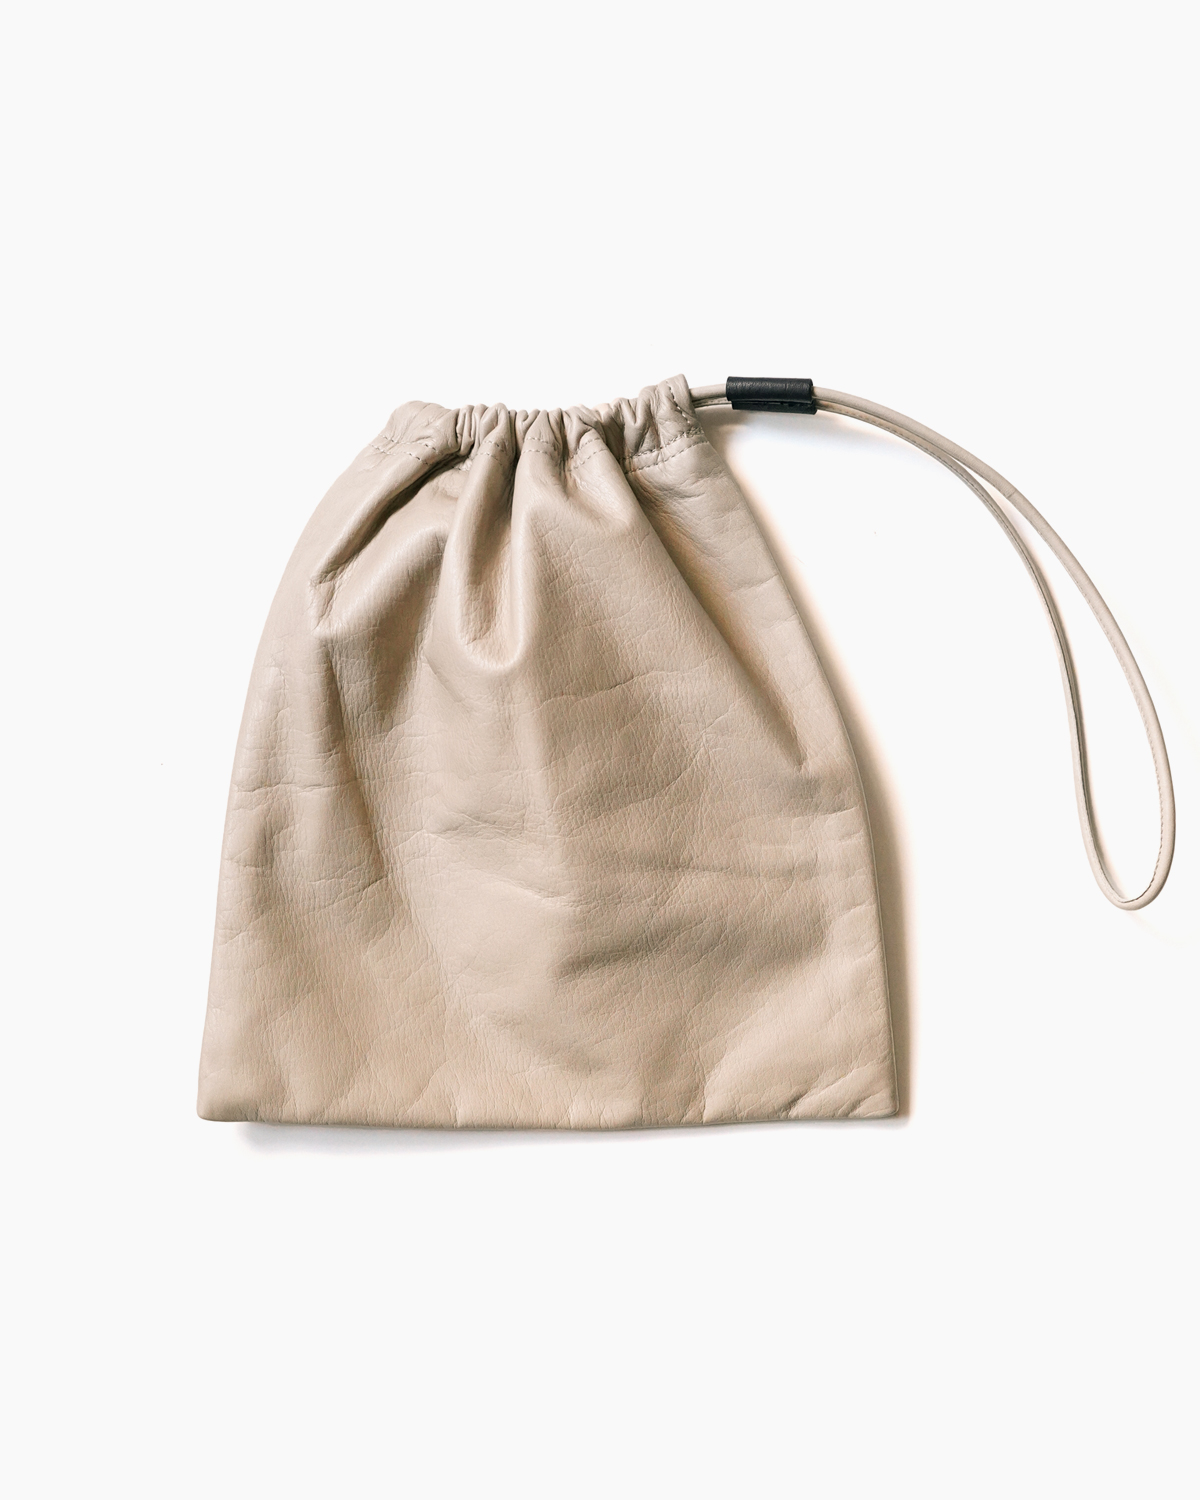 COMESANDGOES｜COW LEATHER DRAWSTRING BAG＜SMALL＞ - GrayBeige ...